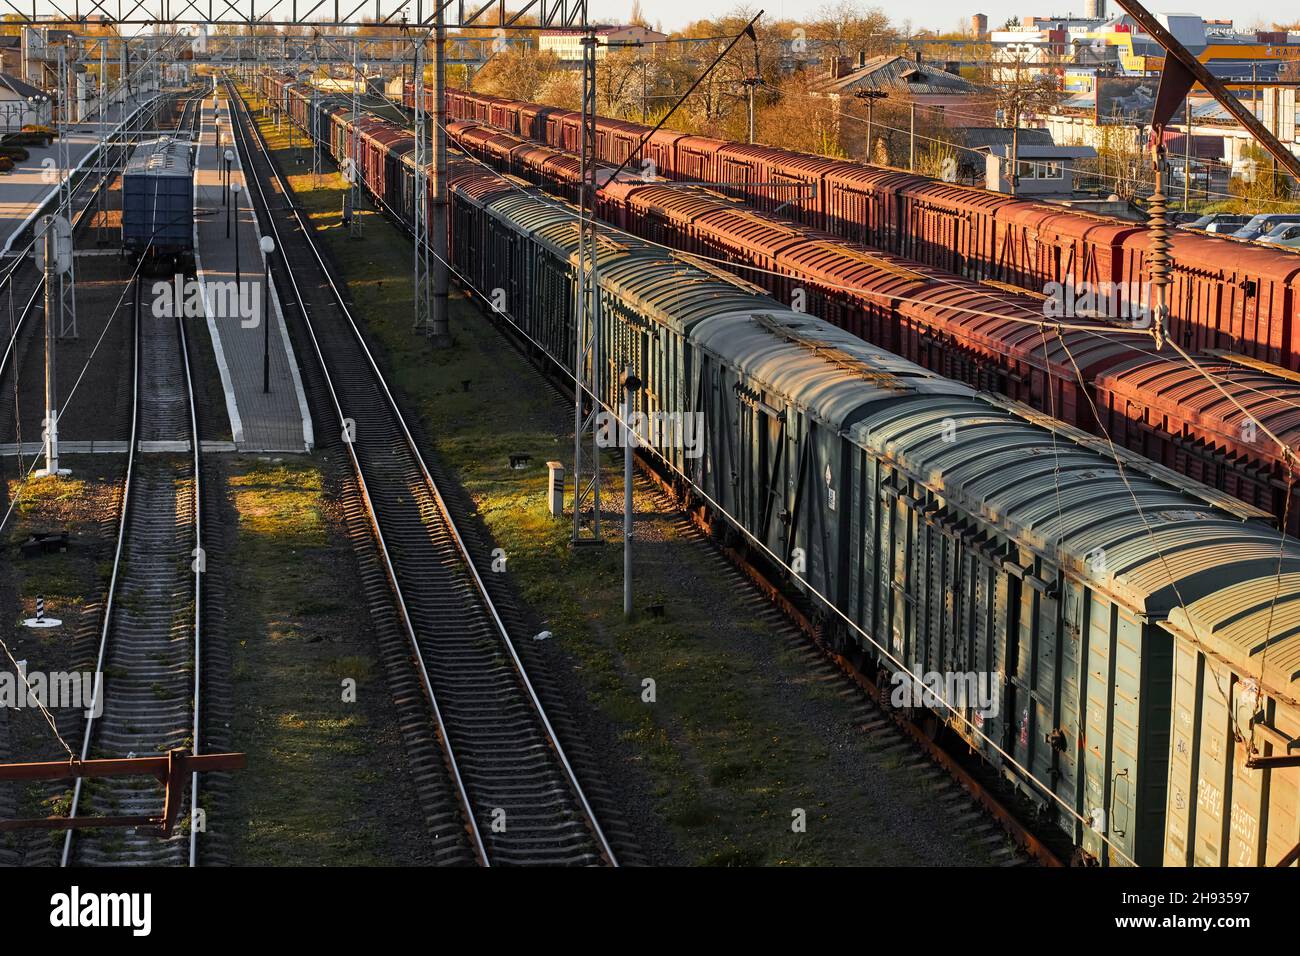 Lutsk, Ukraine - May 26,2021: Locomotive with goods wagon on rails. Freight train carriages at railway station. Classification or sort rail yard Stock Photo